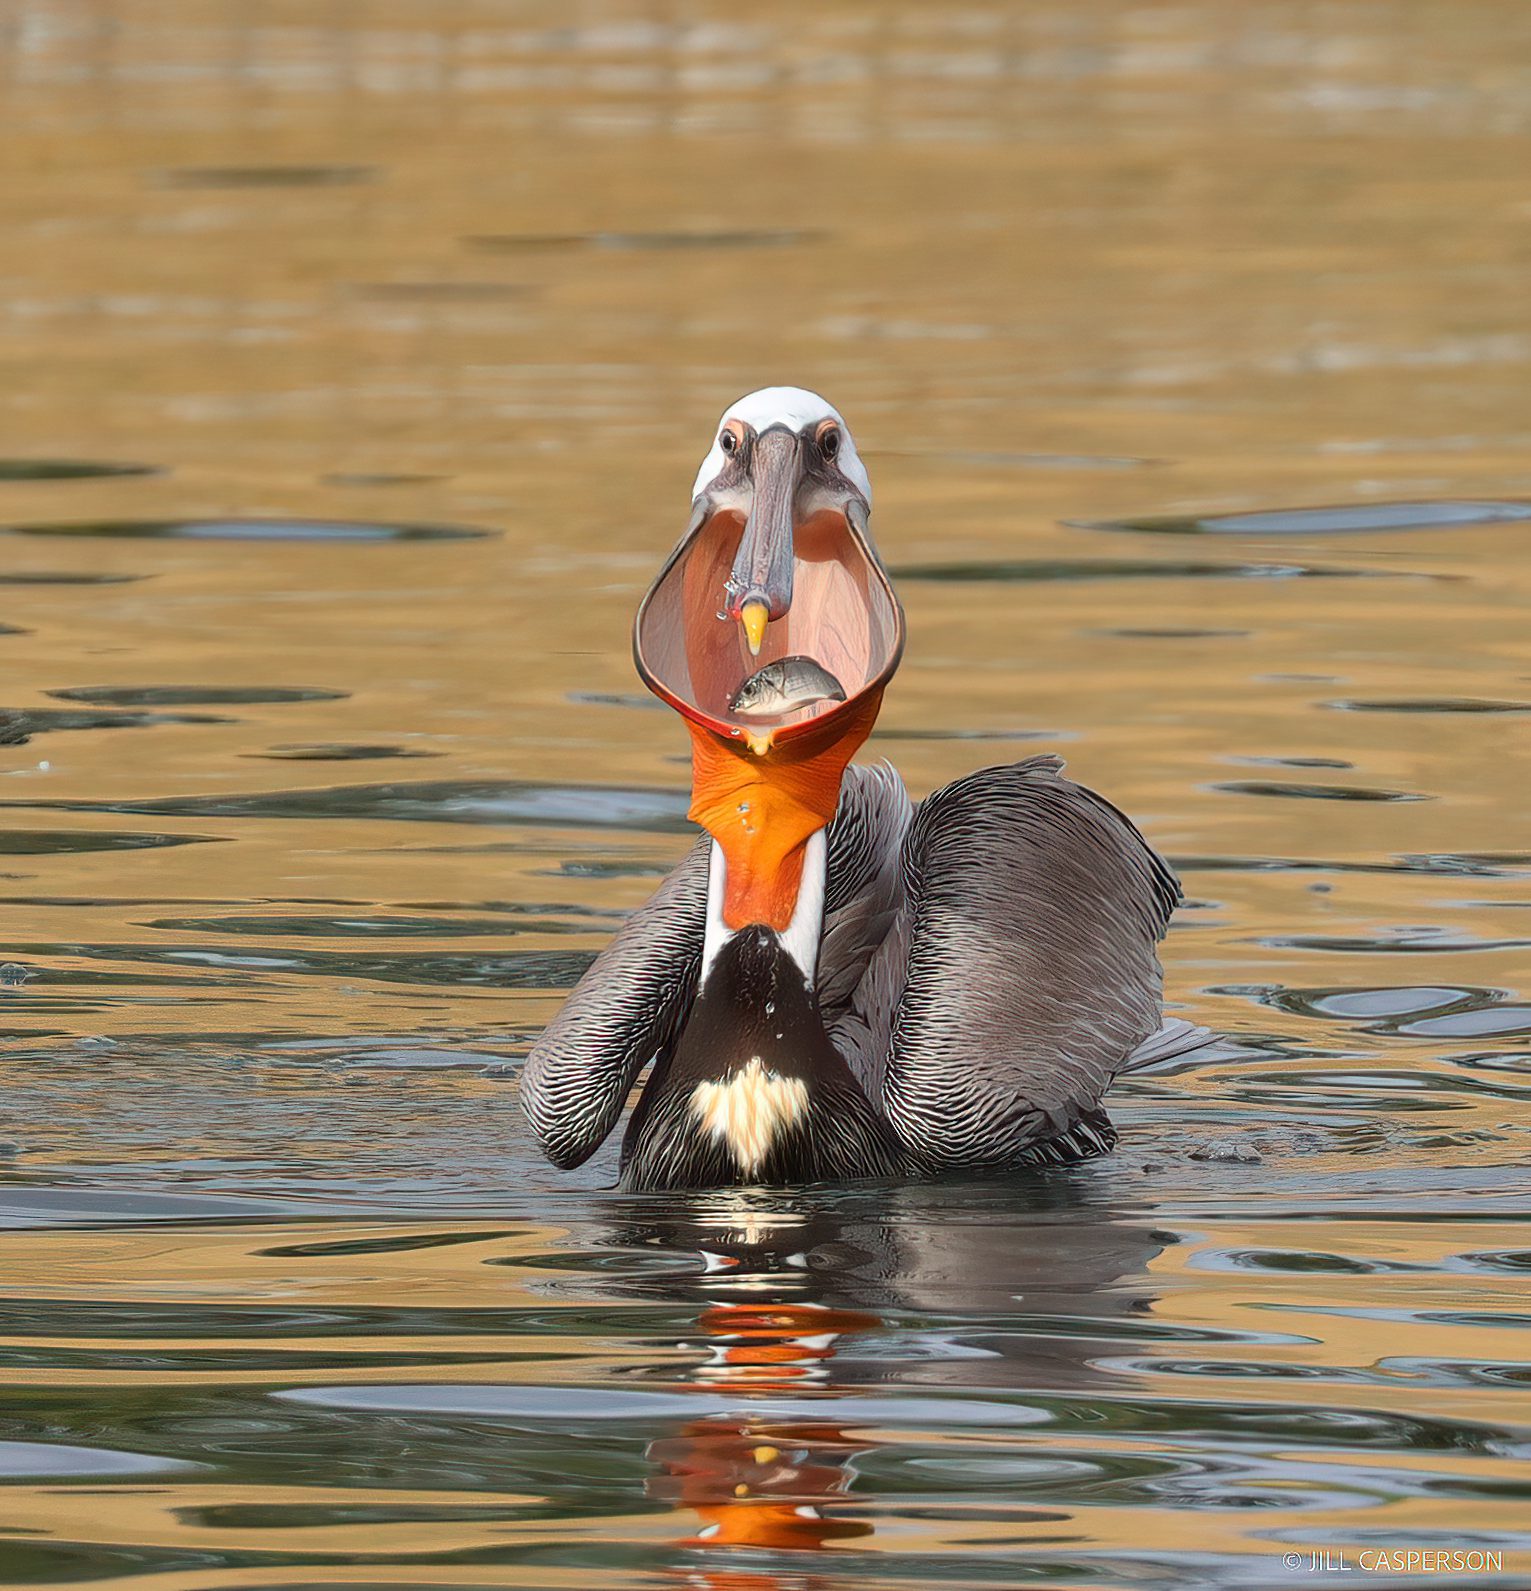 A bird sits on the water and gulps down a fish into its giant pouch